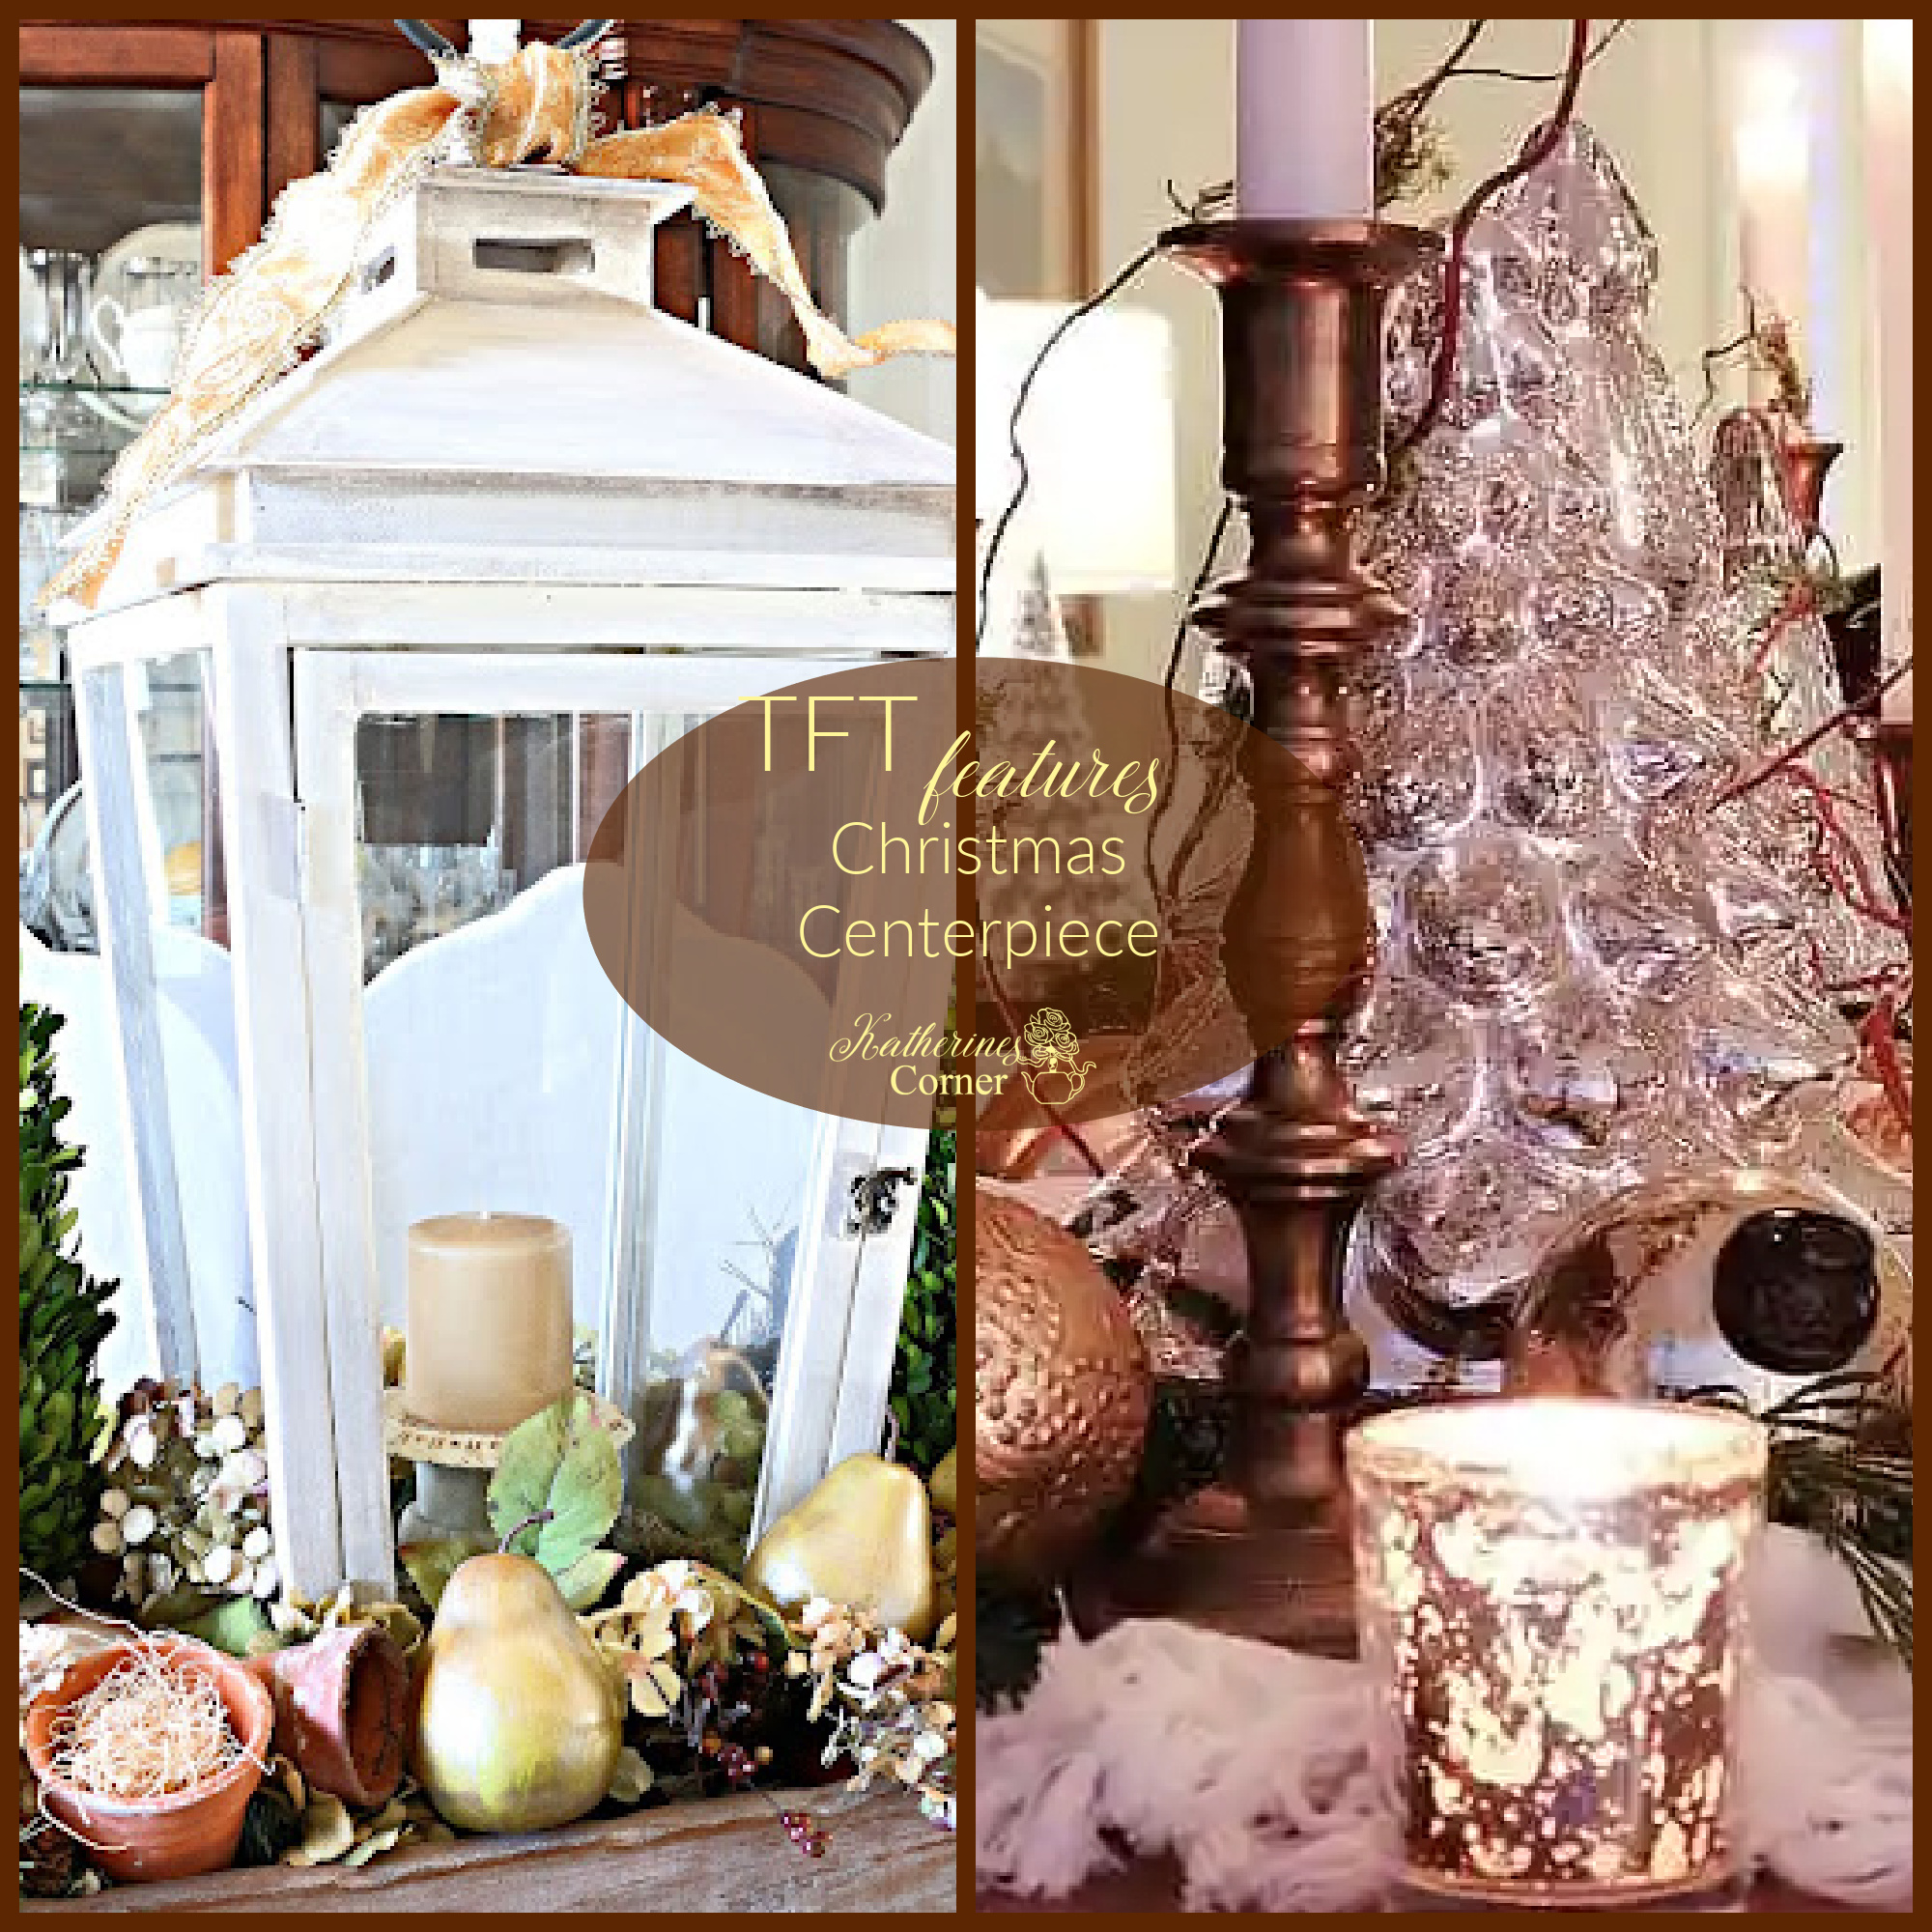 Christmas Centerpieces and the TFT blog hop